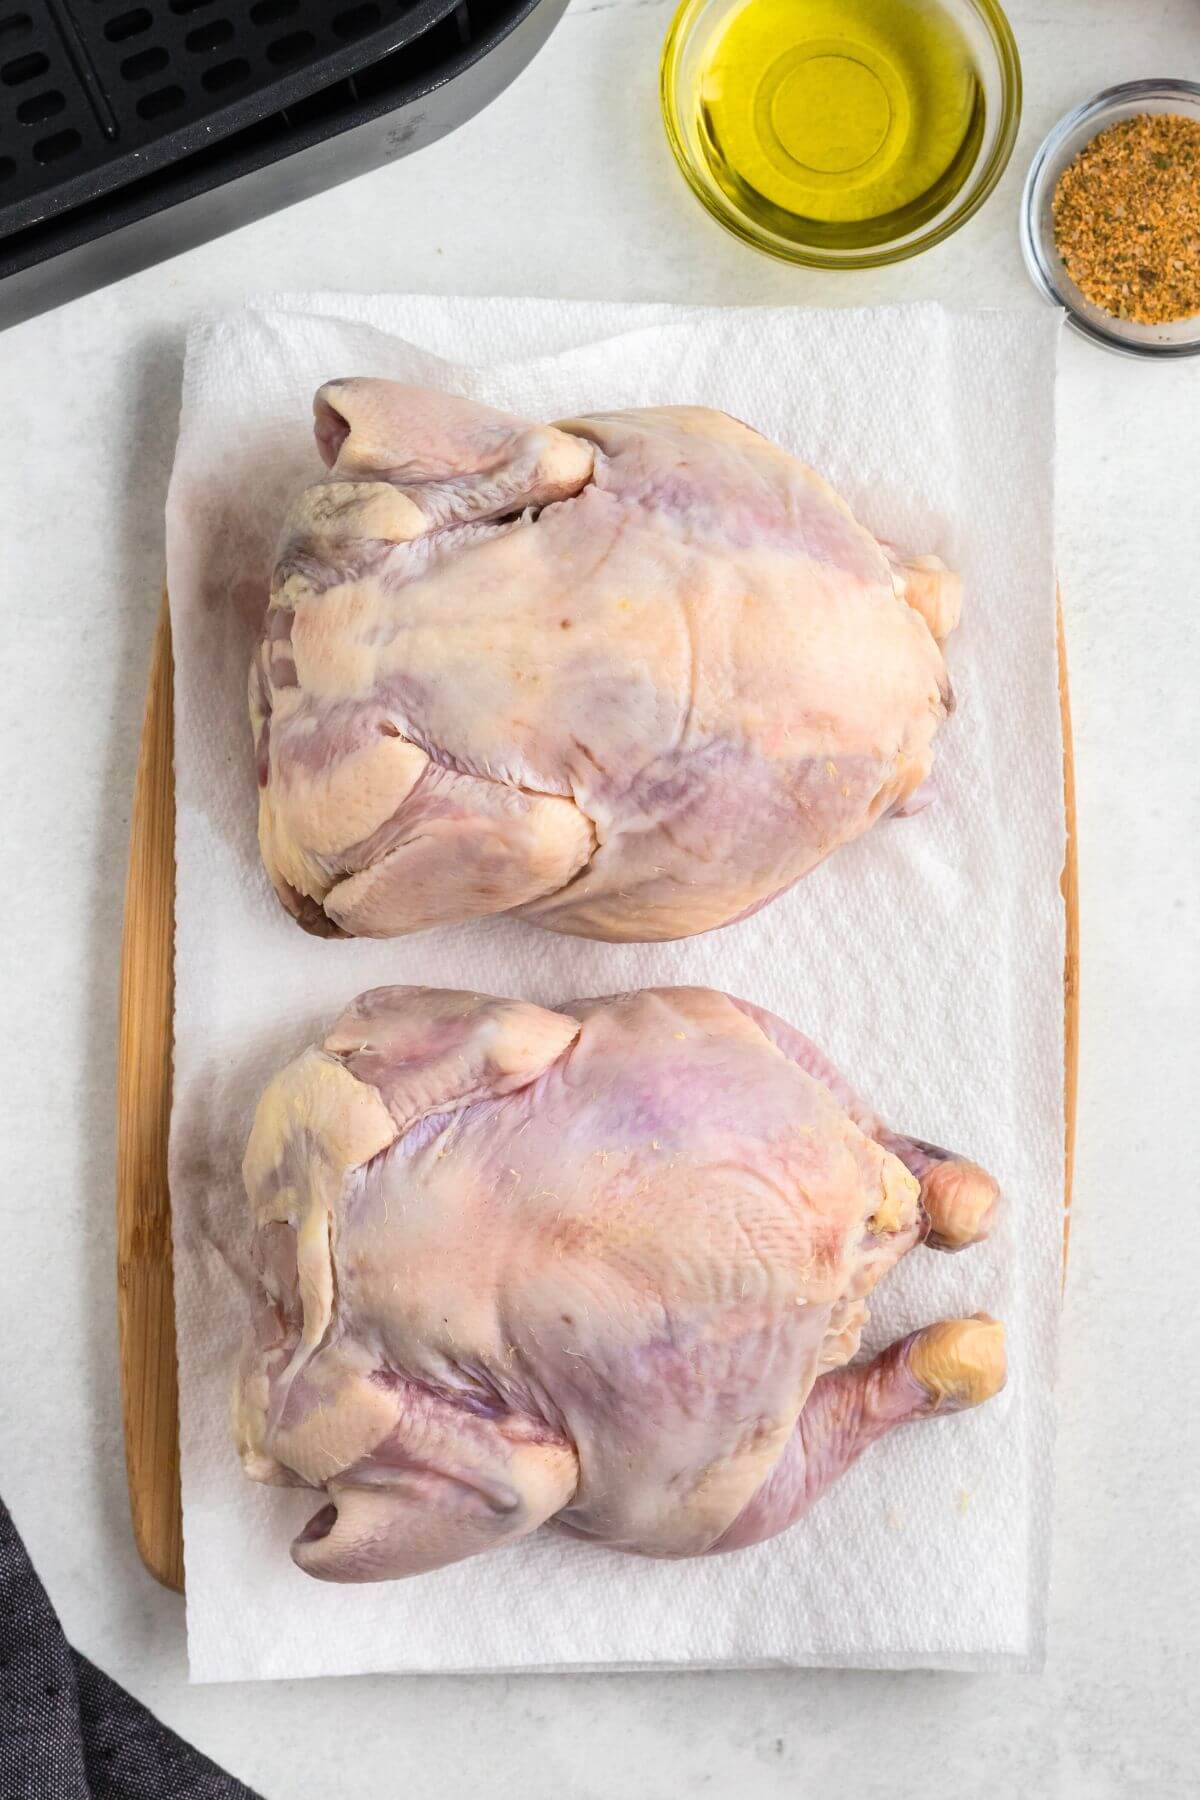 Uncooked Cornish hens on a paper towel before being seasoned. 